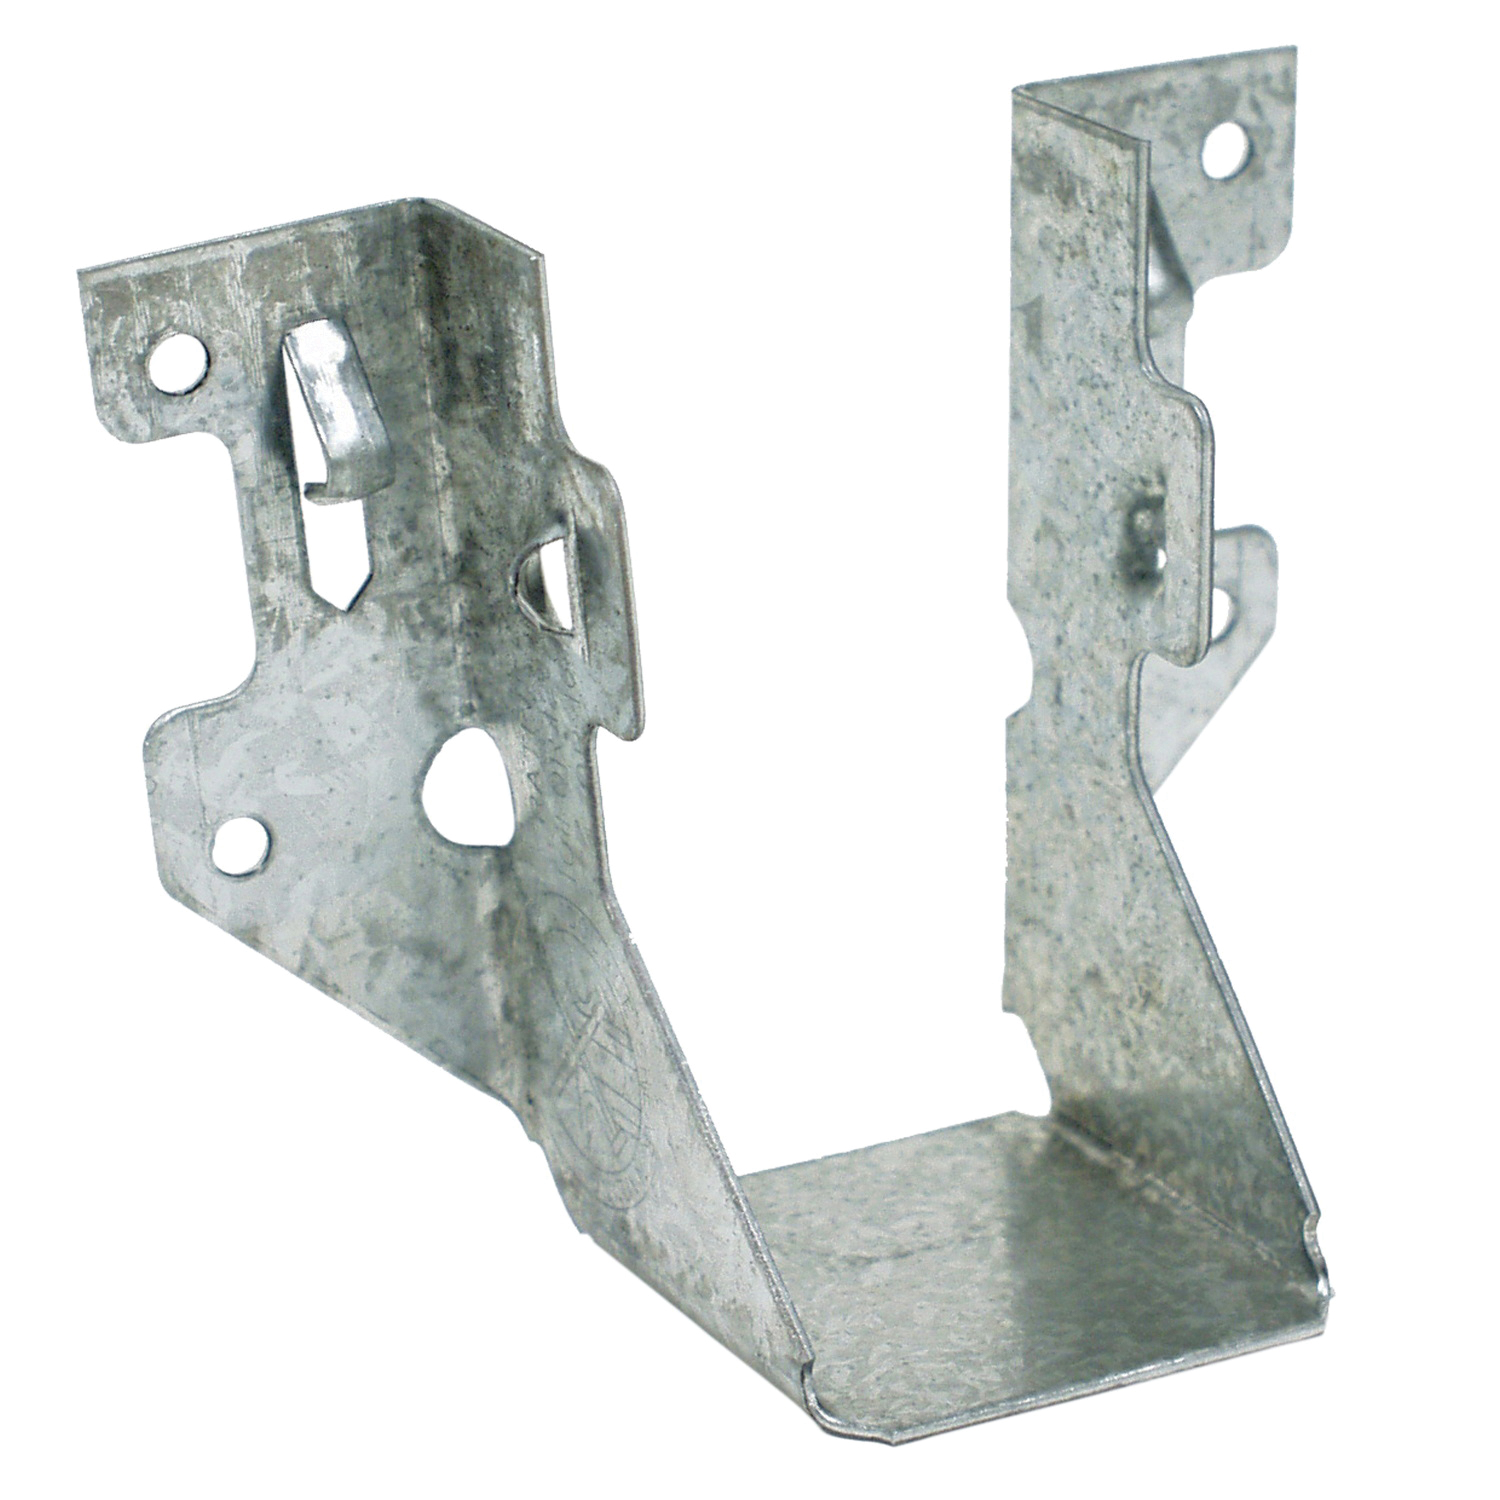 Simpson Strong-Tie LUS LUS24Z Joist Hanger, 3-1/8 in H, 1-3/4 in D, 1-9/16 in W, Steel, ZMAX, Face Mounting - 1